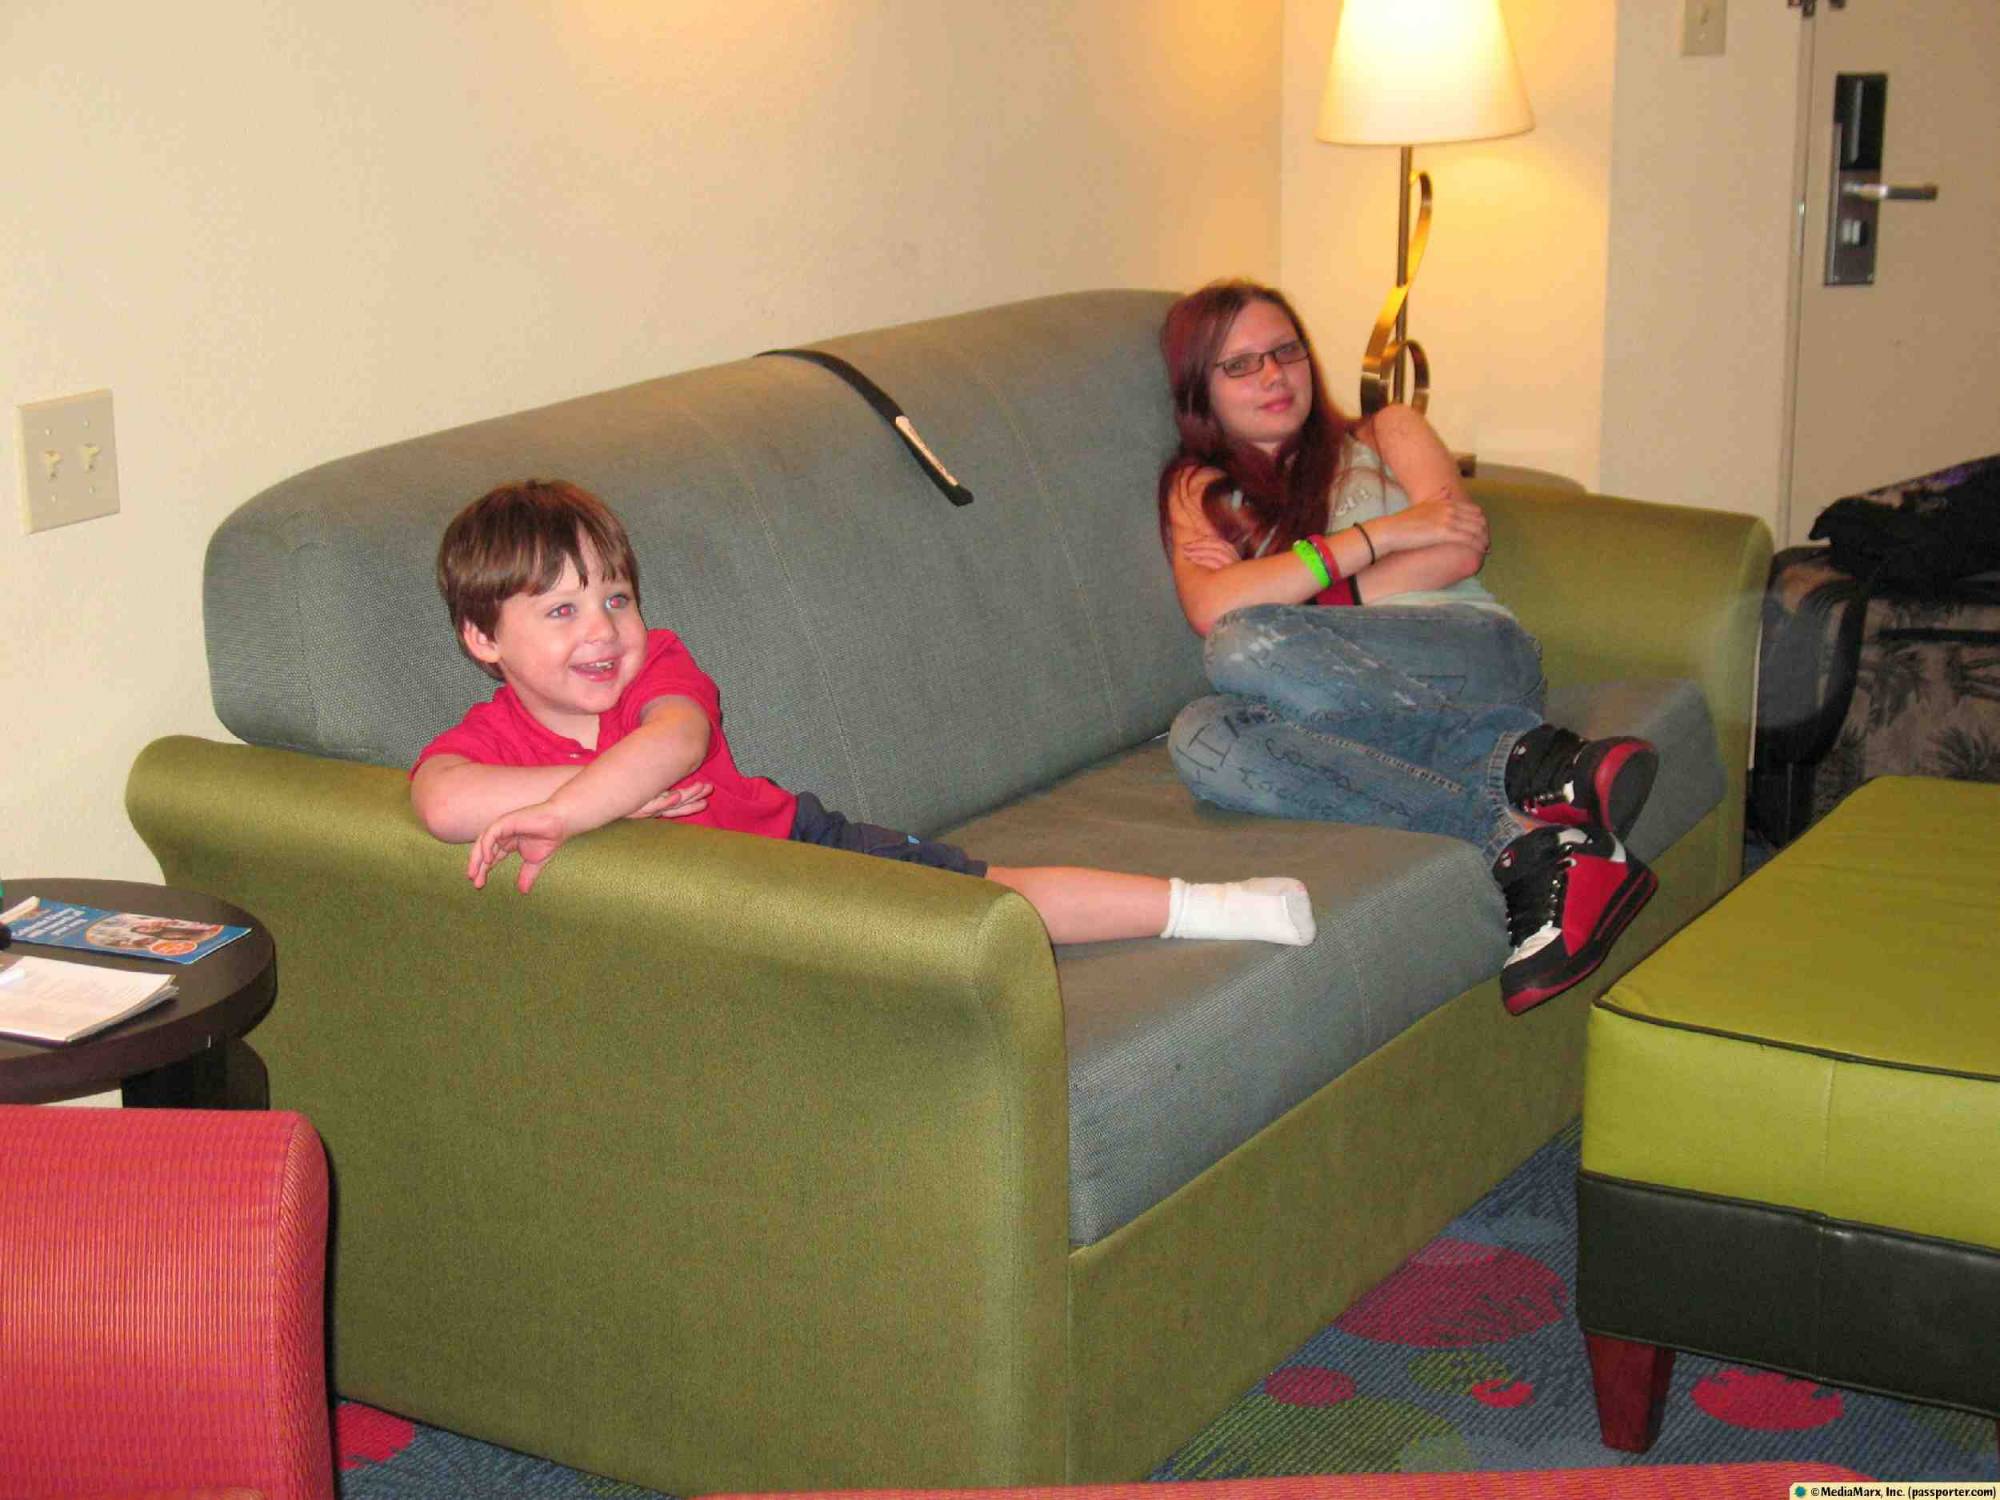 All-Star Music - Family Suite Couch Potatoes